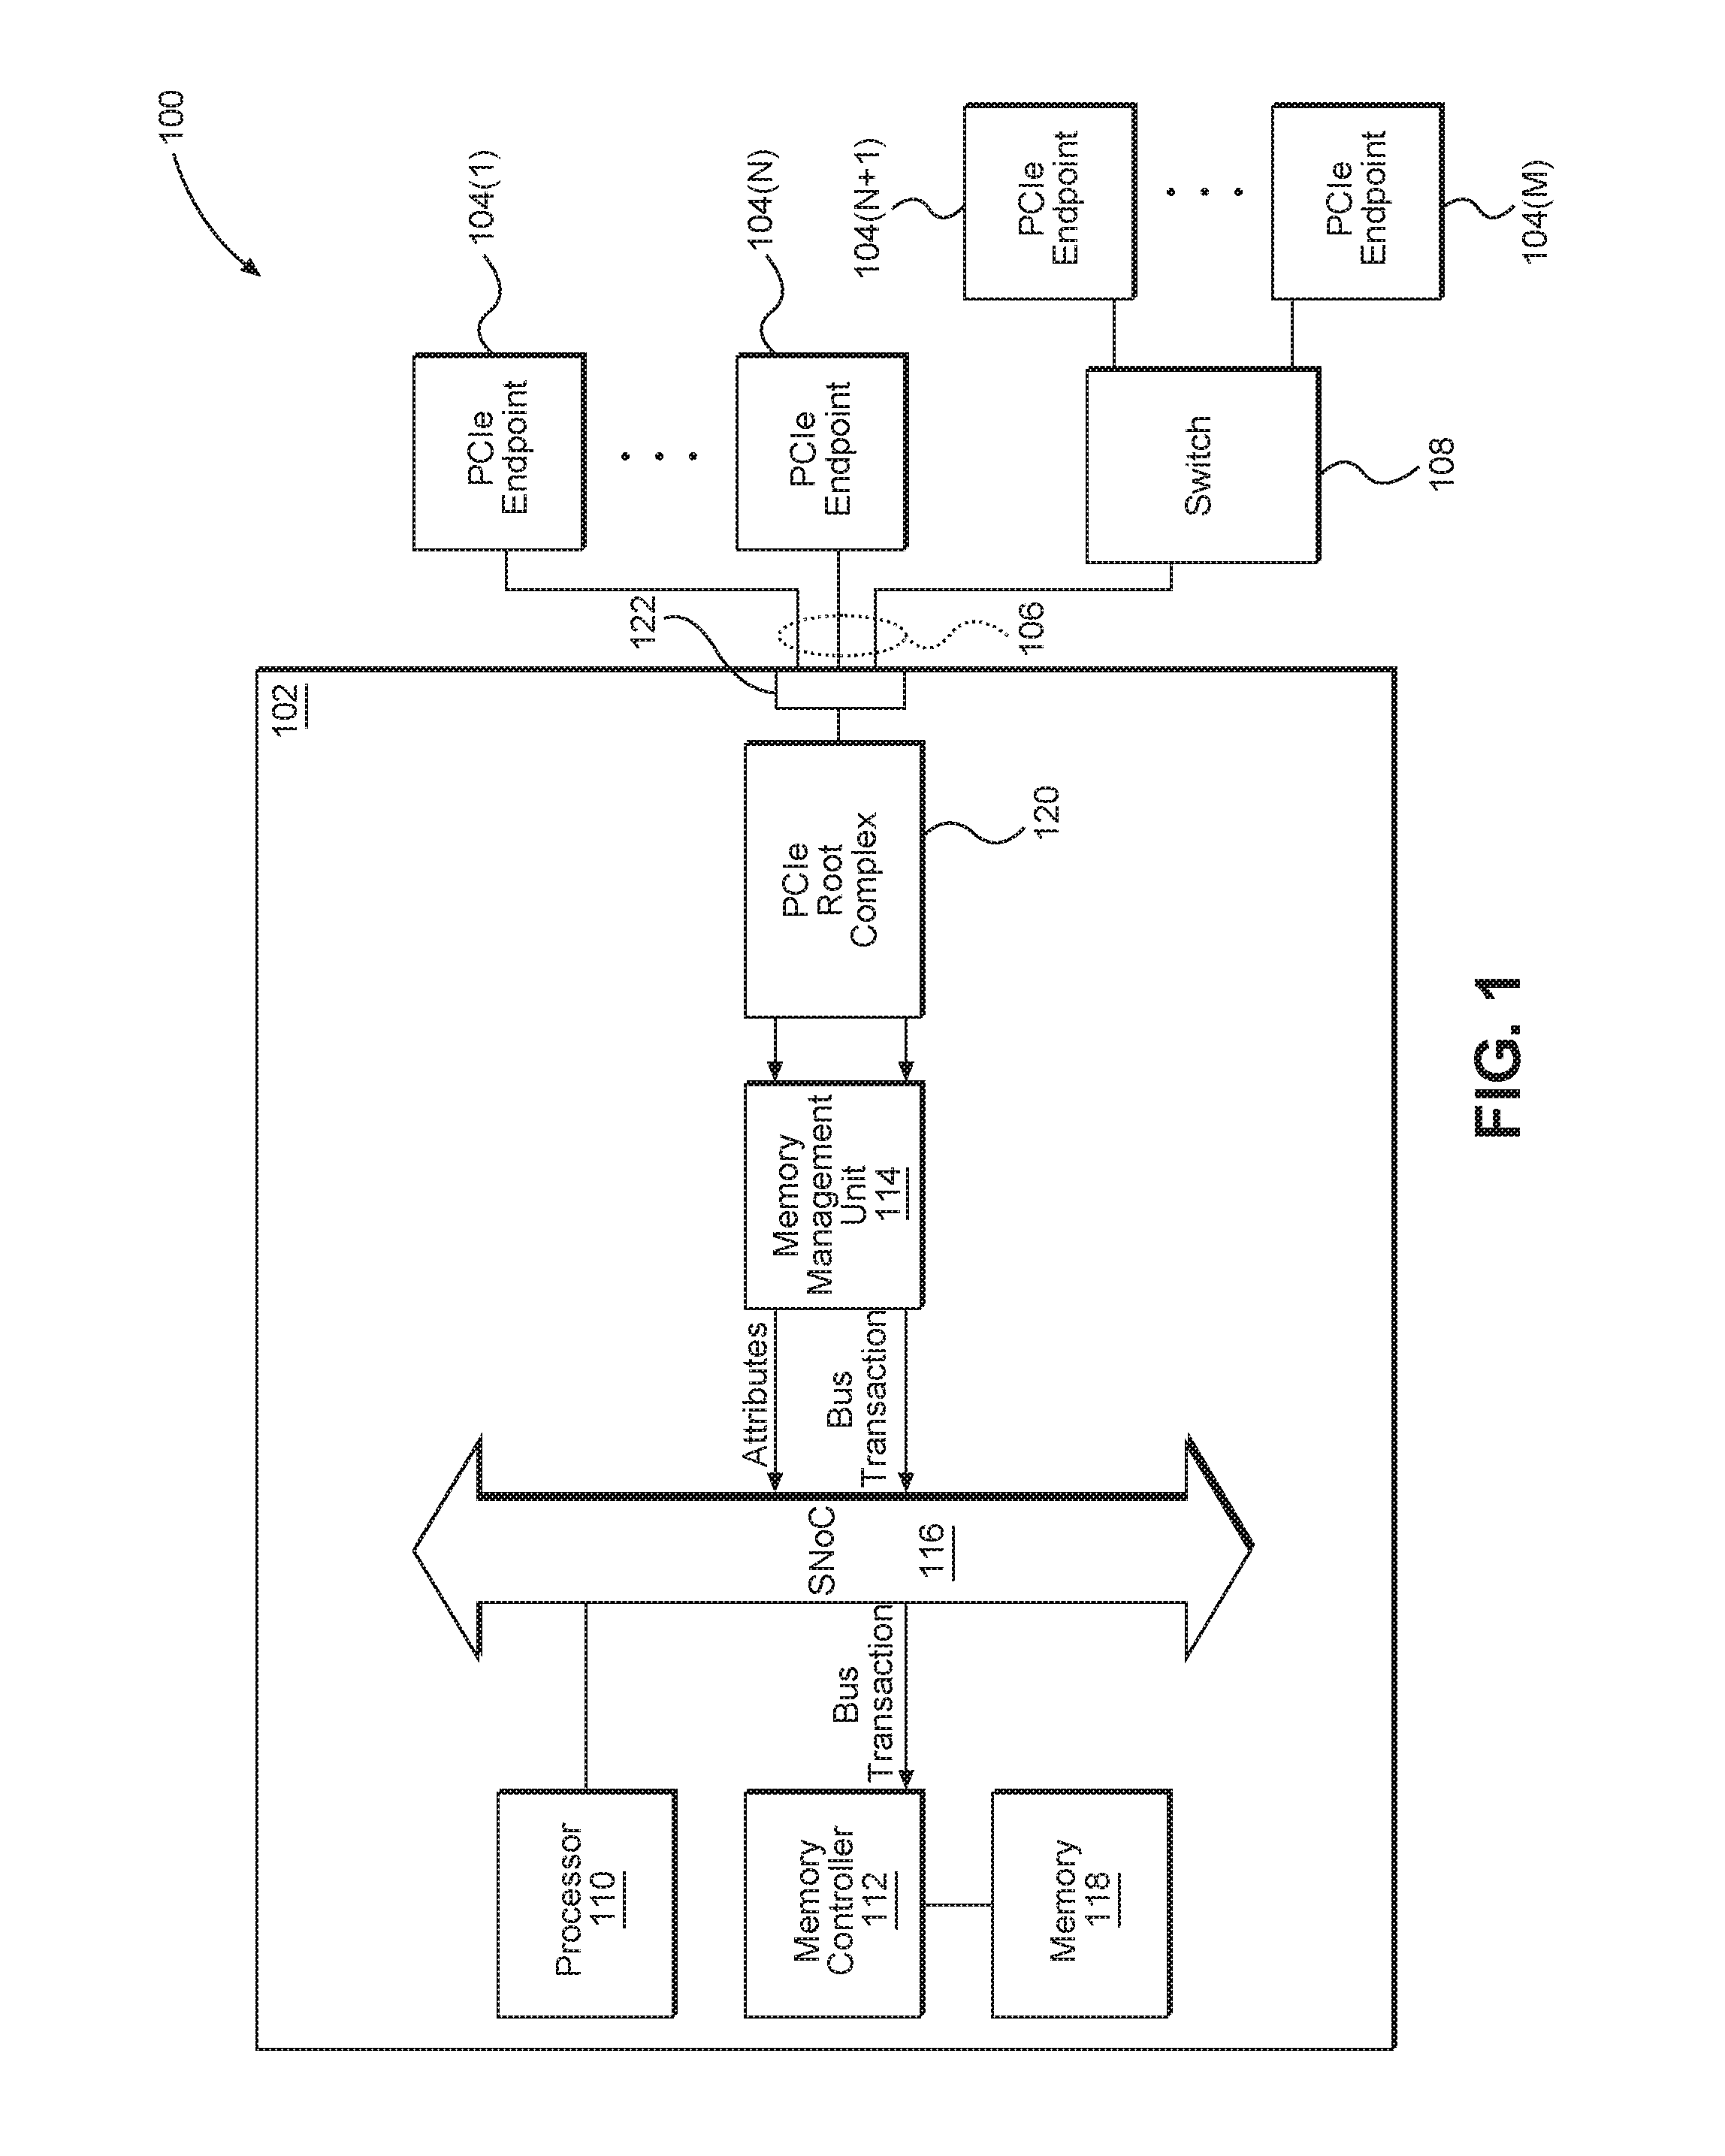 COHERENCY DRIVEN ENHANCEMENTS TO A PERIPHERAL COMPONENT INTERCONNECT (PCI) EXPRESS (PCIe) TRANSACTION LAYER